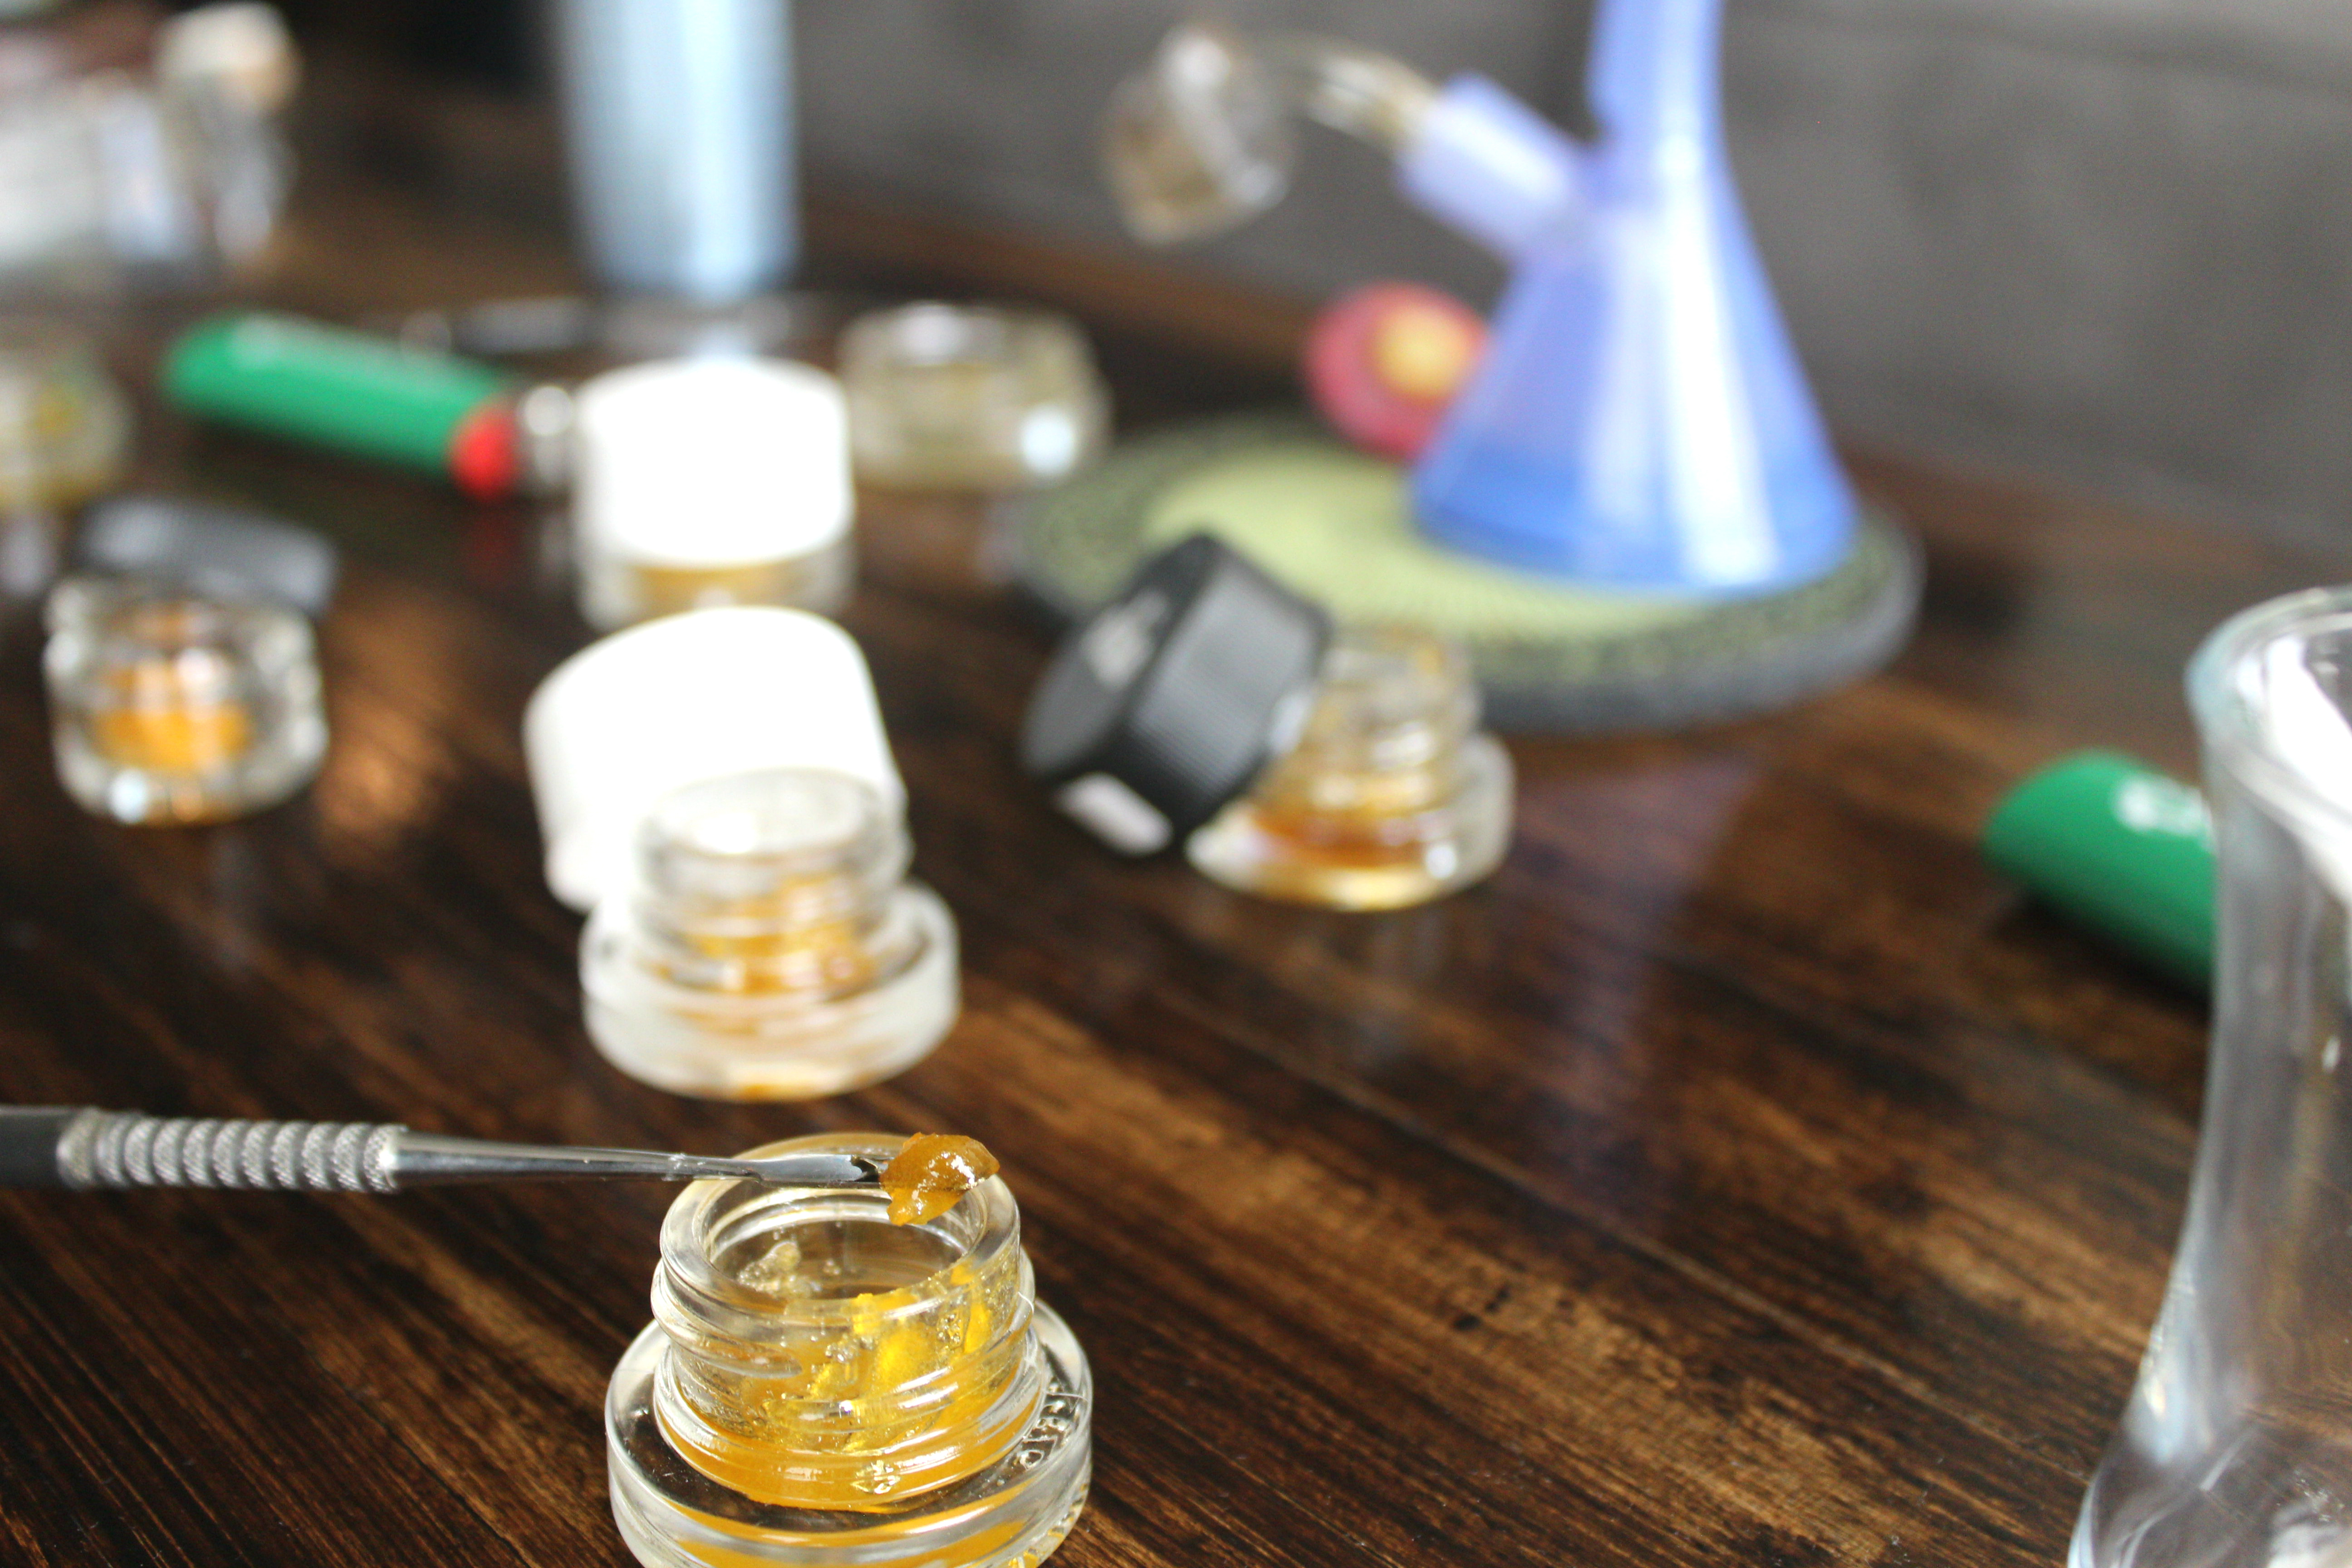 Solventless vs. Solvent-Based Cannabis Concentrates | PotGuide.com